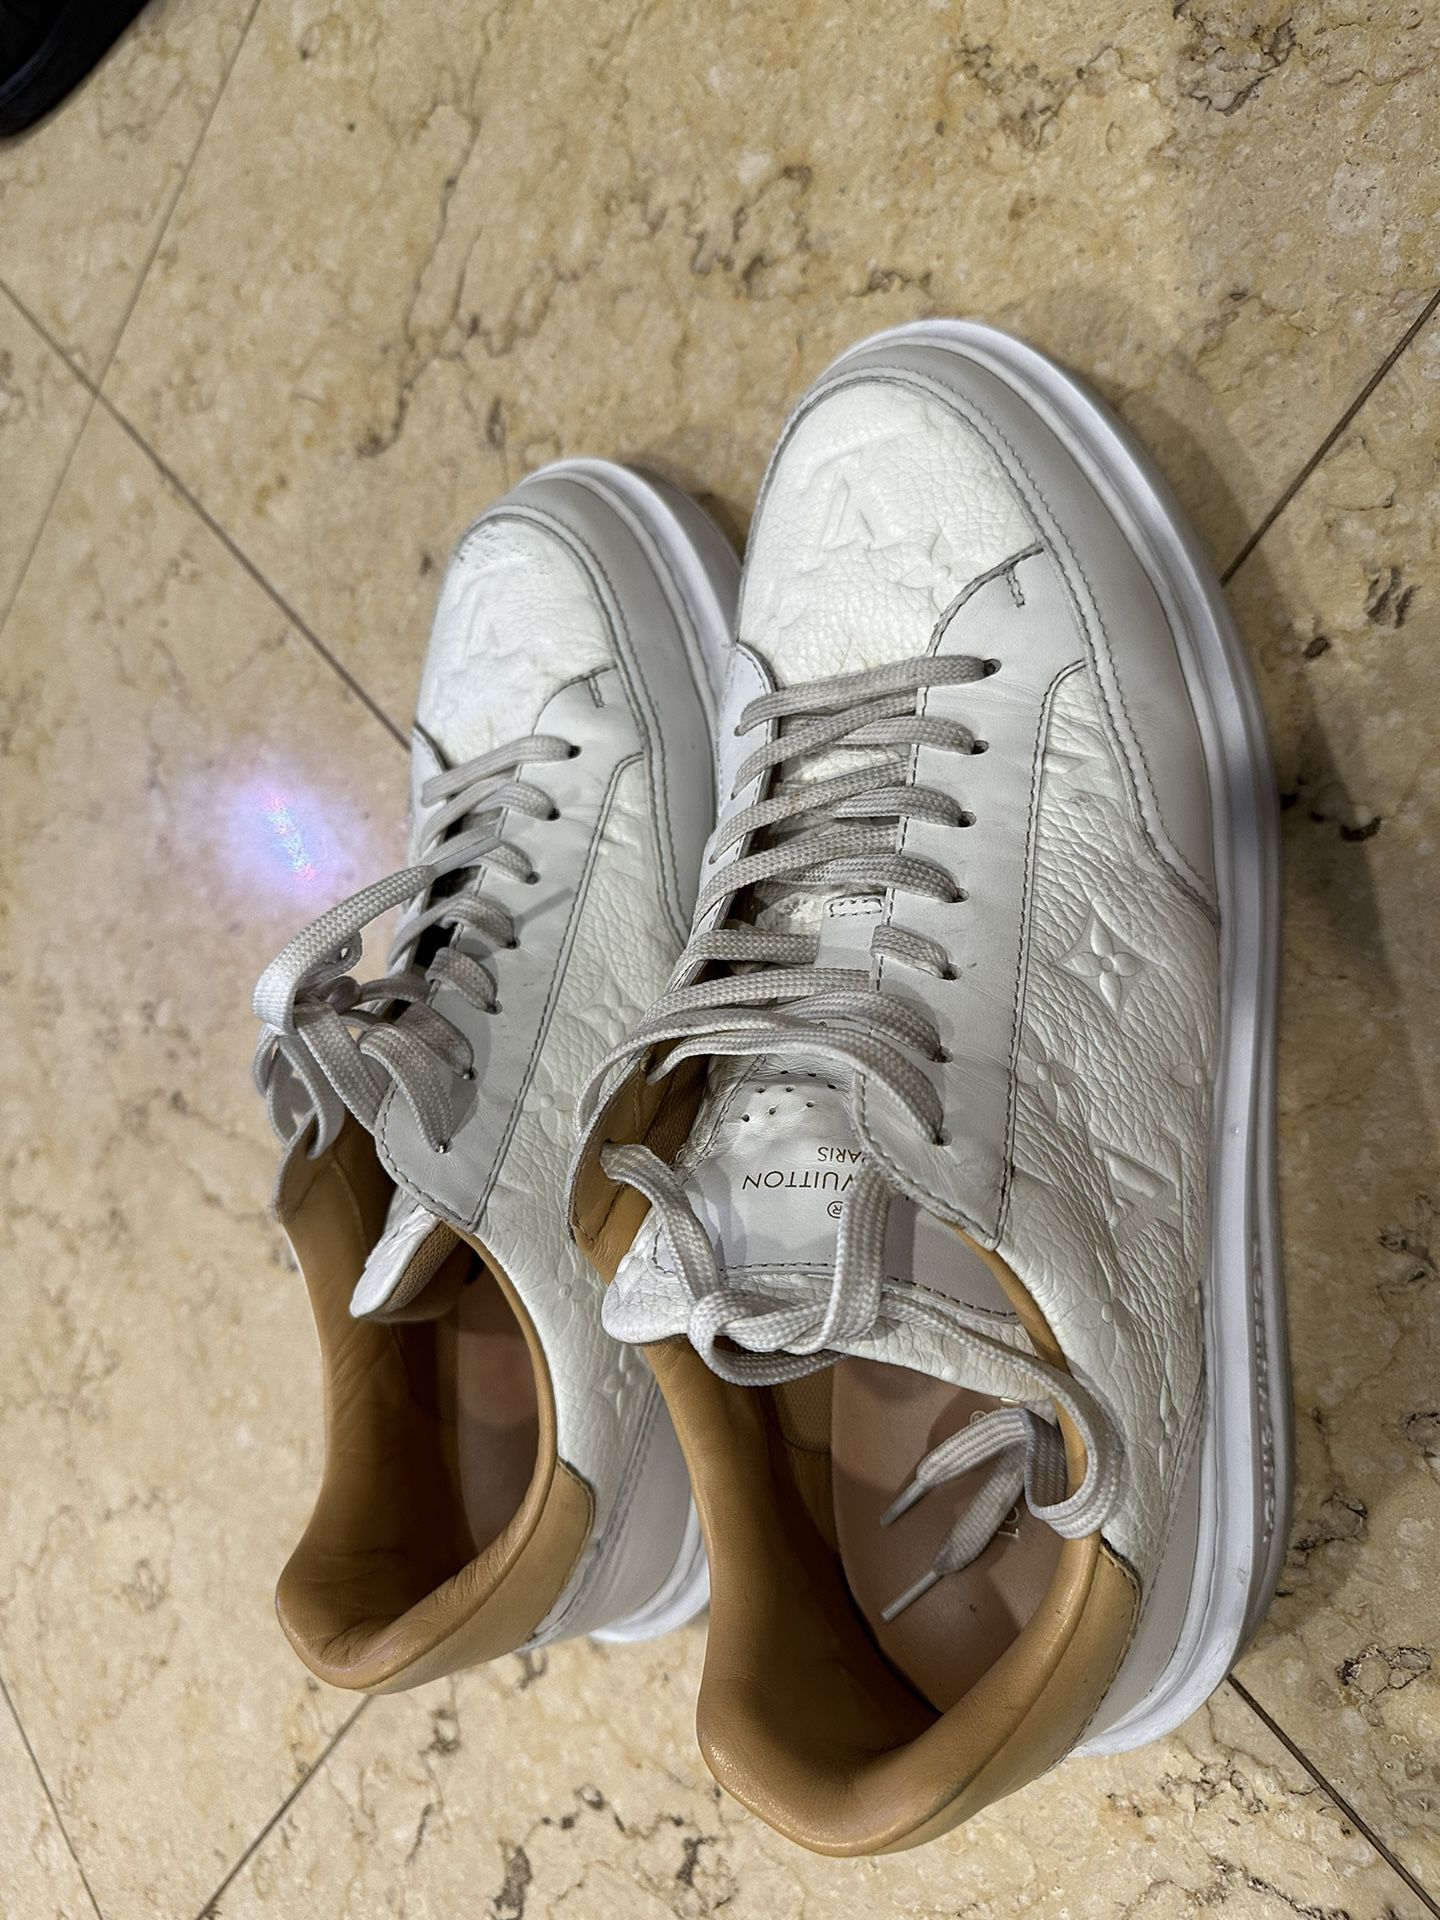 Louis Vuitton BEVERLY HILLS SNEAKER 100% Authentic for Sale